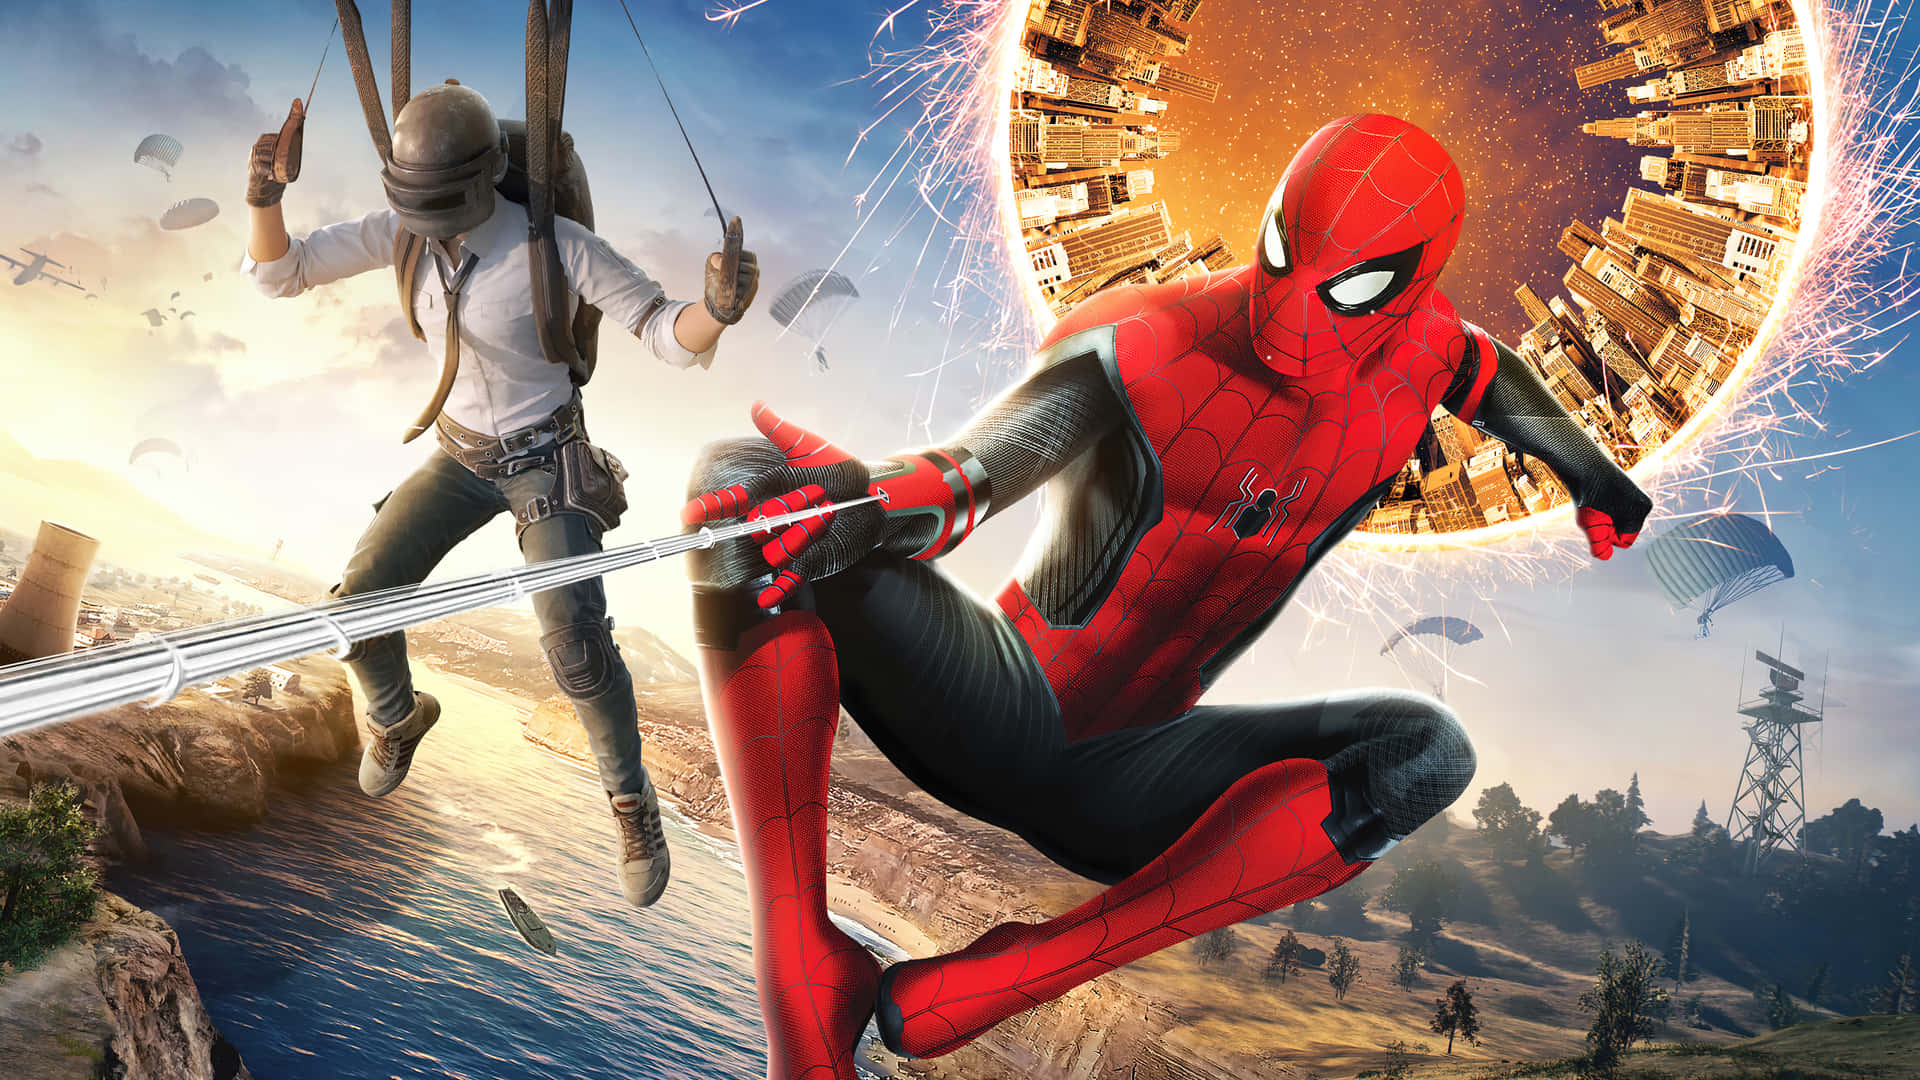 Spider-Man swings into action in No Way Home